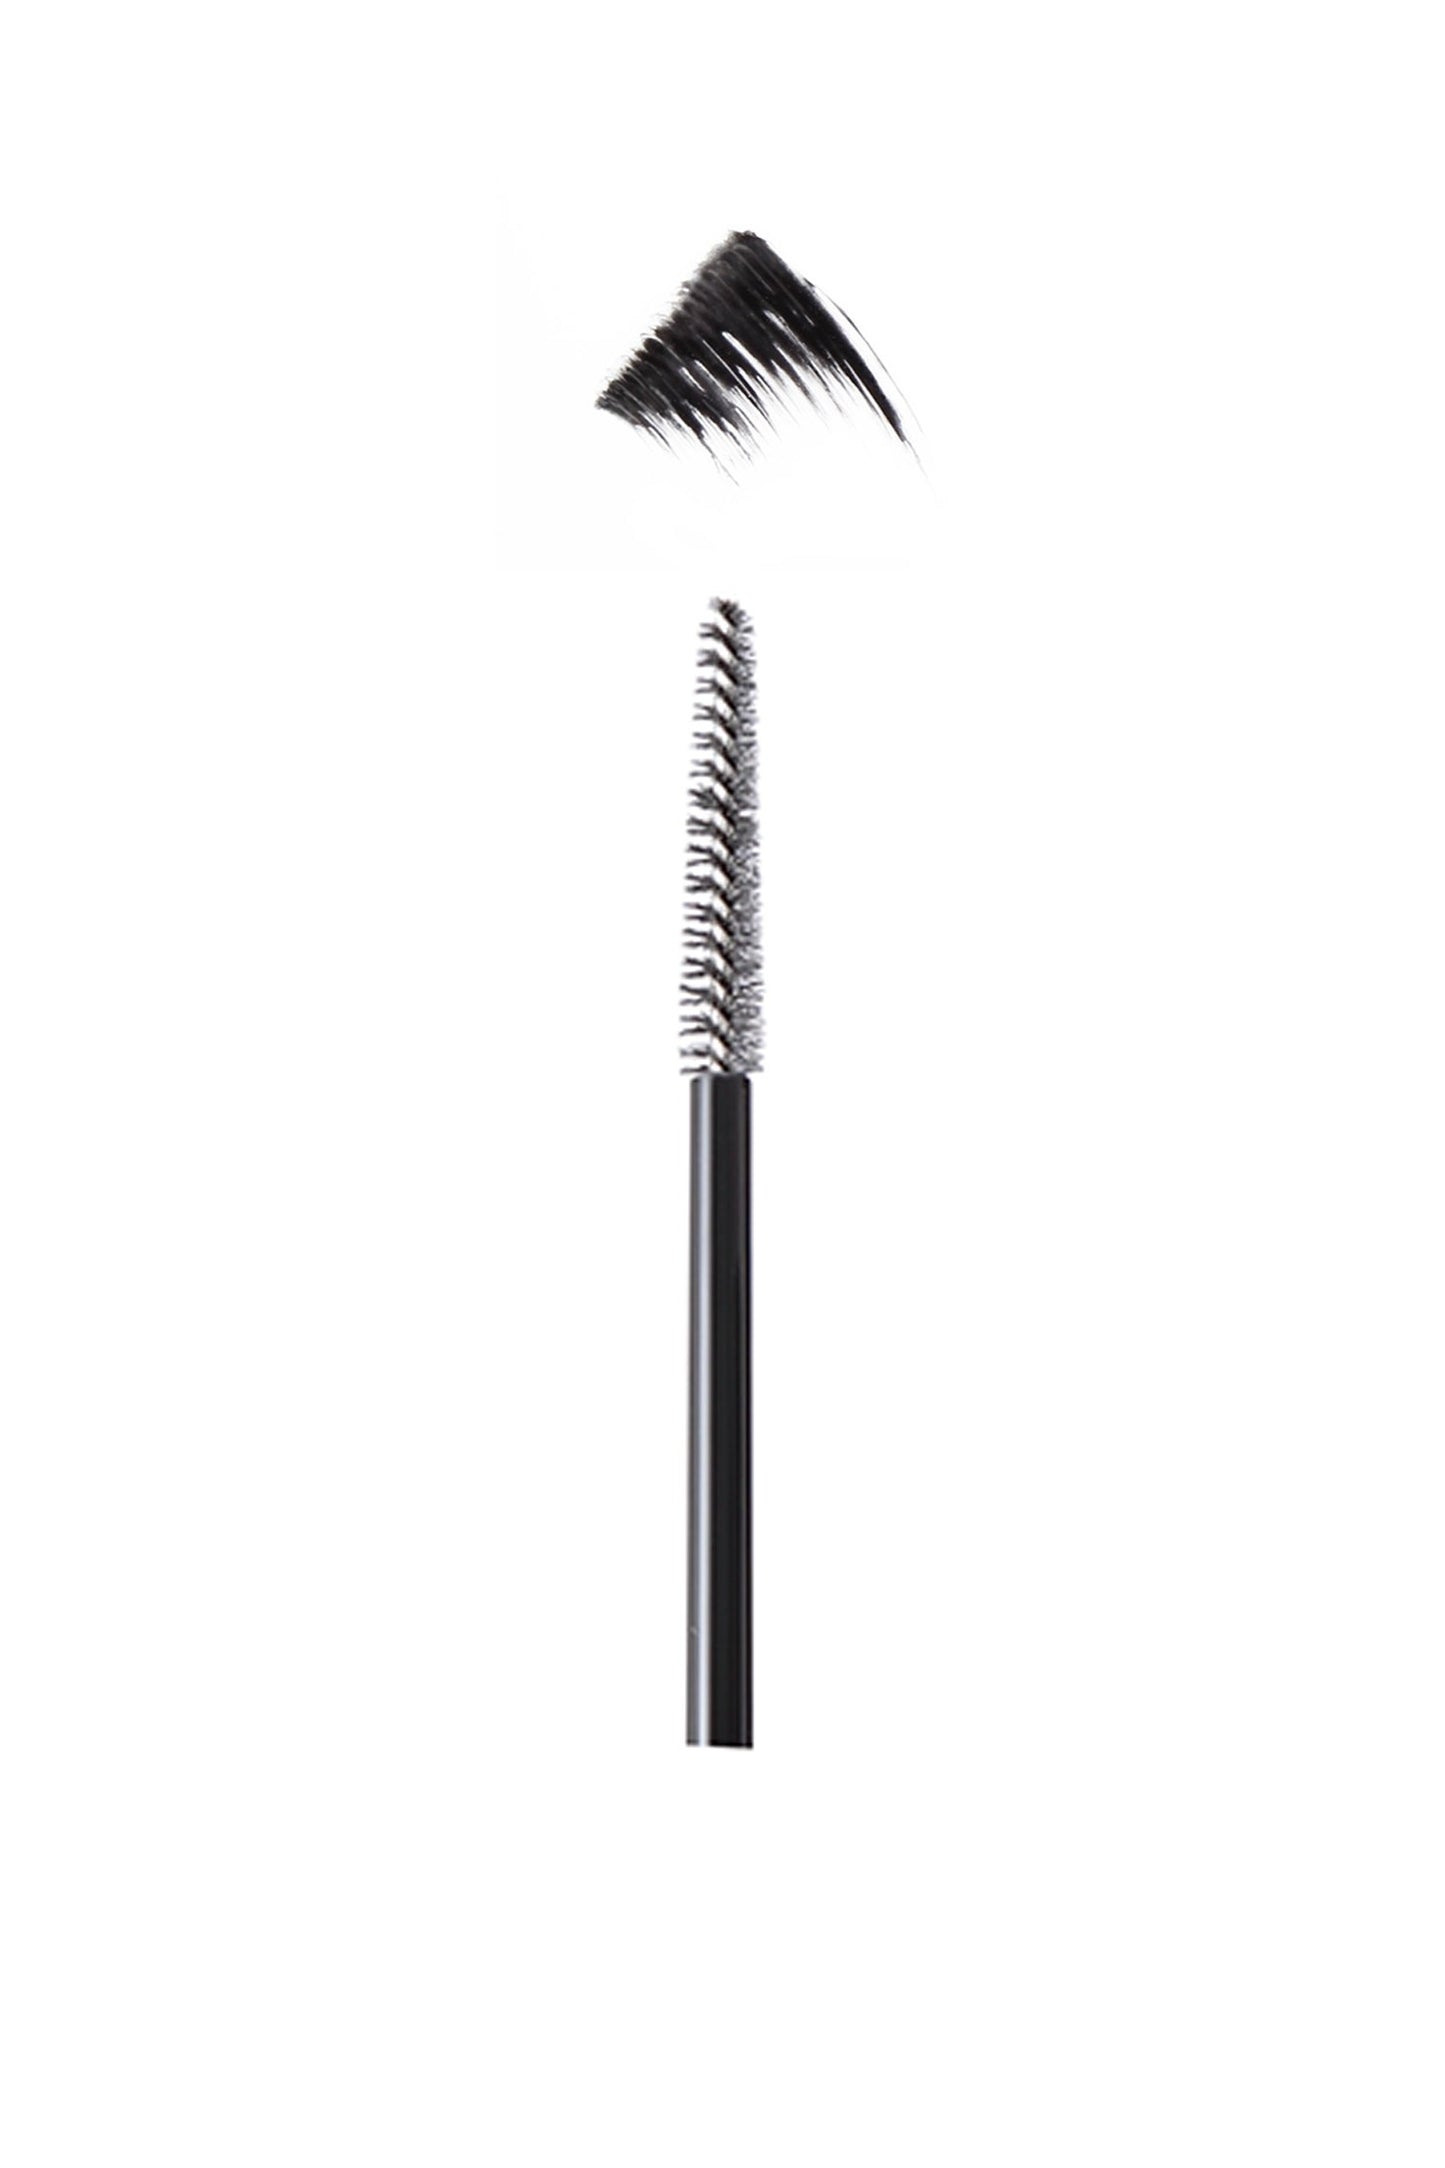 The brush combs and separates lashes evenly without clumping using dense, cone-shaped bristles.